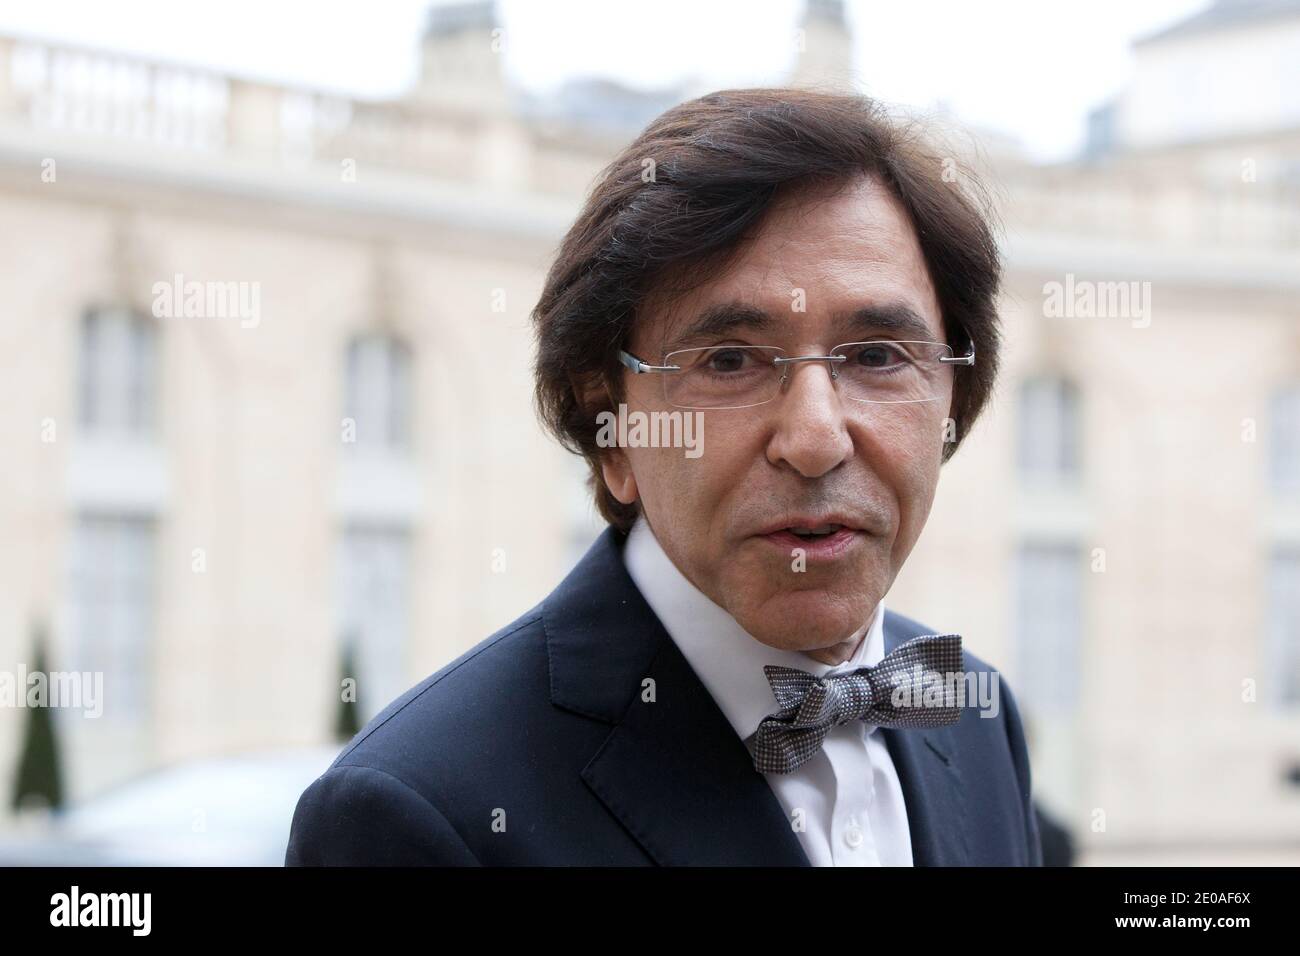 Belgium Prime Minister Elio Di Rupo answers to medias after a meeting with French President Nicolas Sarkozy at the Elysee Palace, in Paris, France on February 24, 2012. Photo by Stephane Lemouton/ABACAPRESS.COM. Stock Photo